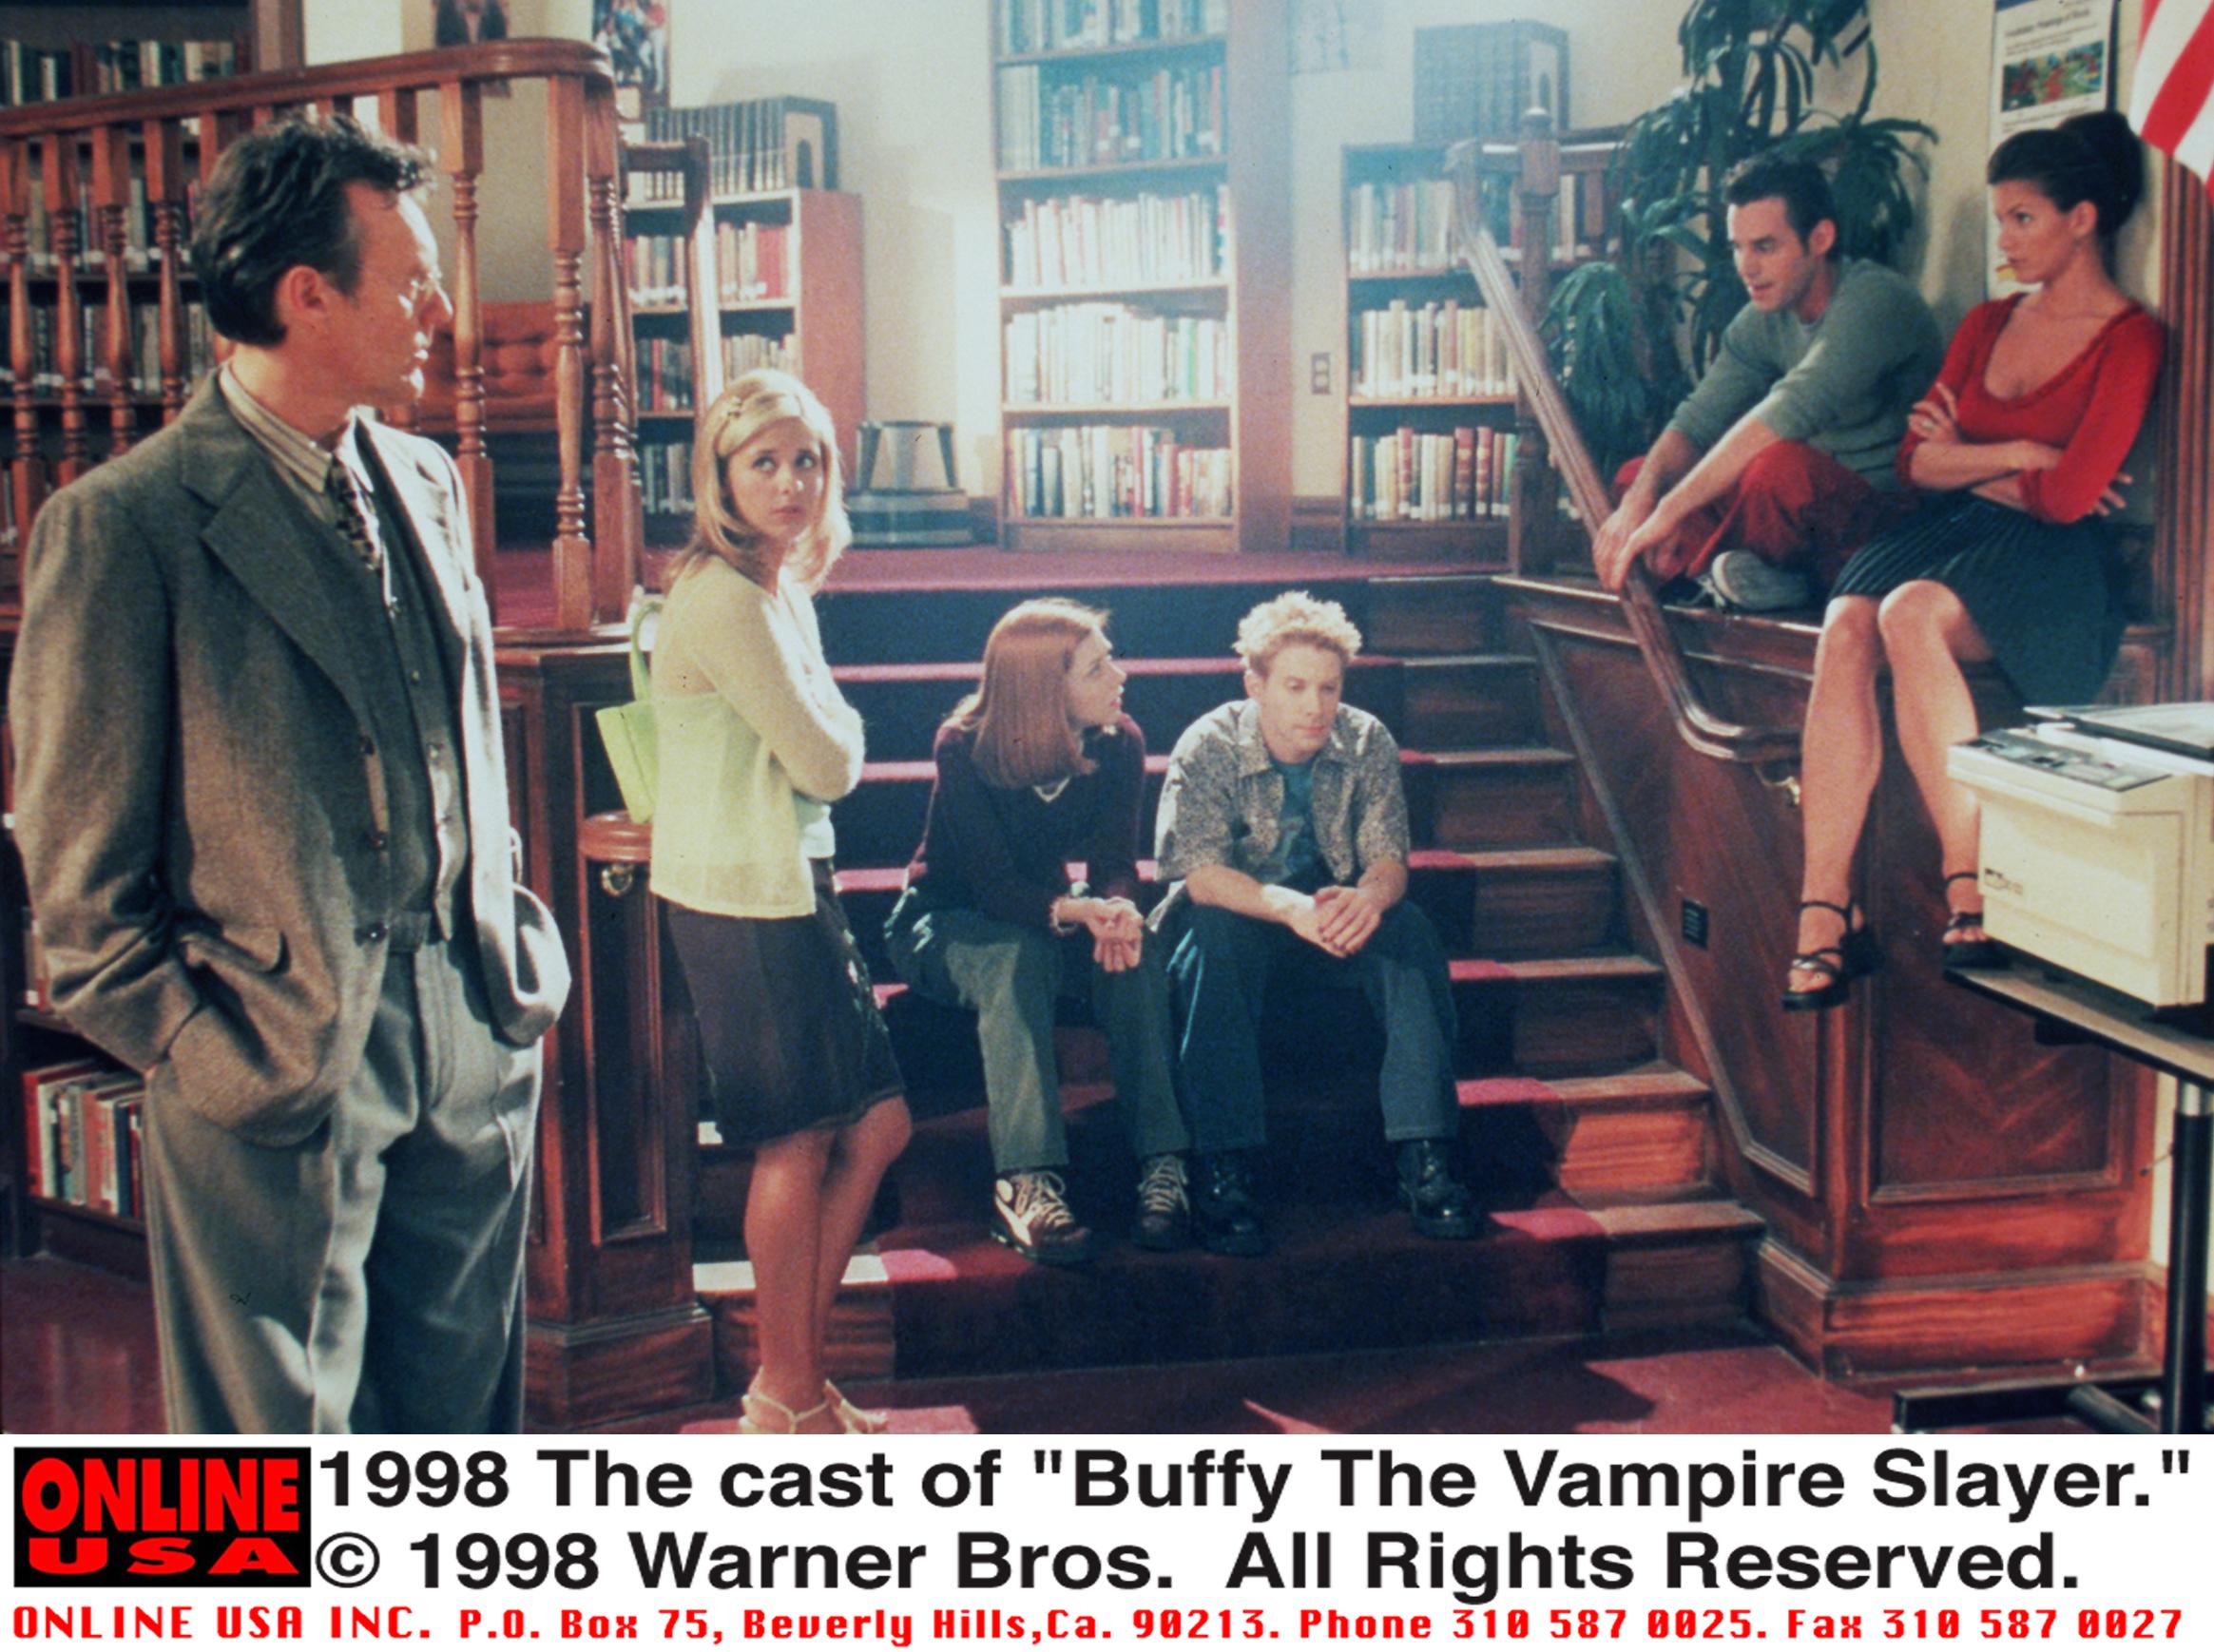 The cast of “Buffy The Vampire Slayer” photographed in a library in the late ’90s, including Anthony Stewart Head, Sarah Michelle Gellar, Alyson Hannigan, Seth Green, Nicholas Brendon, and Charisma Carpenter